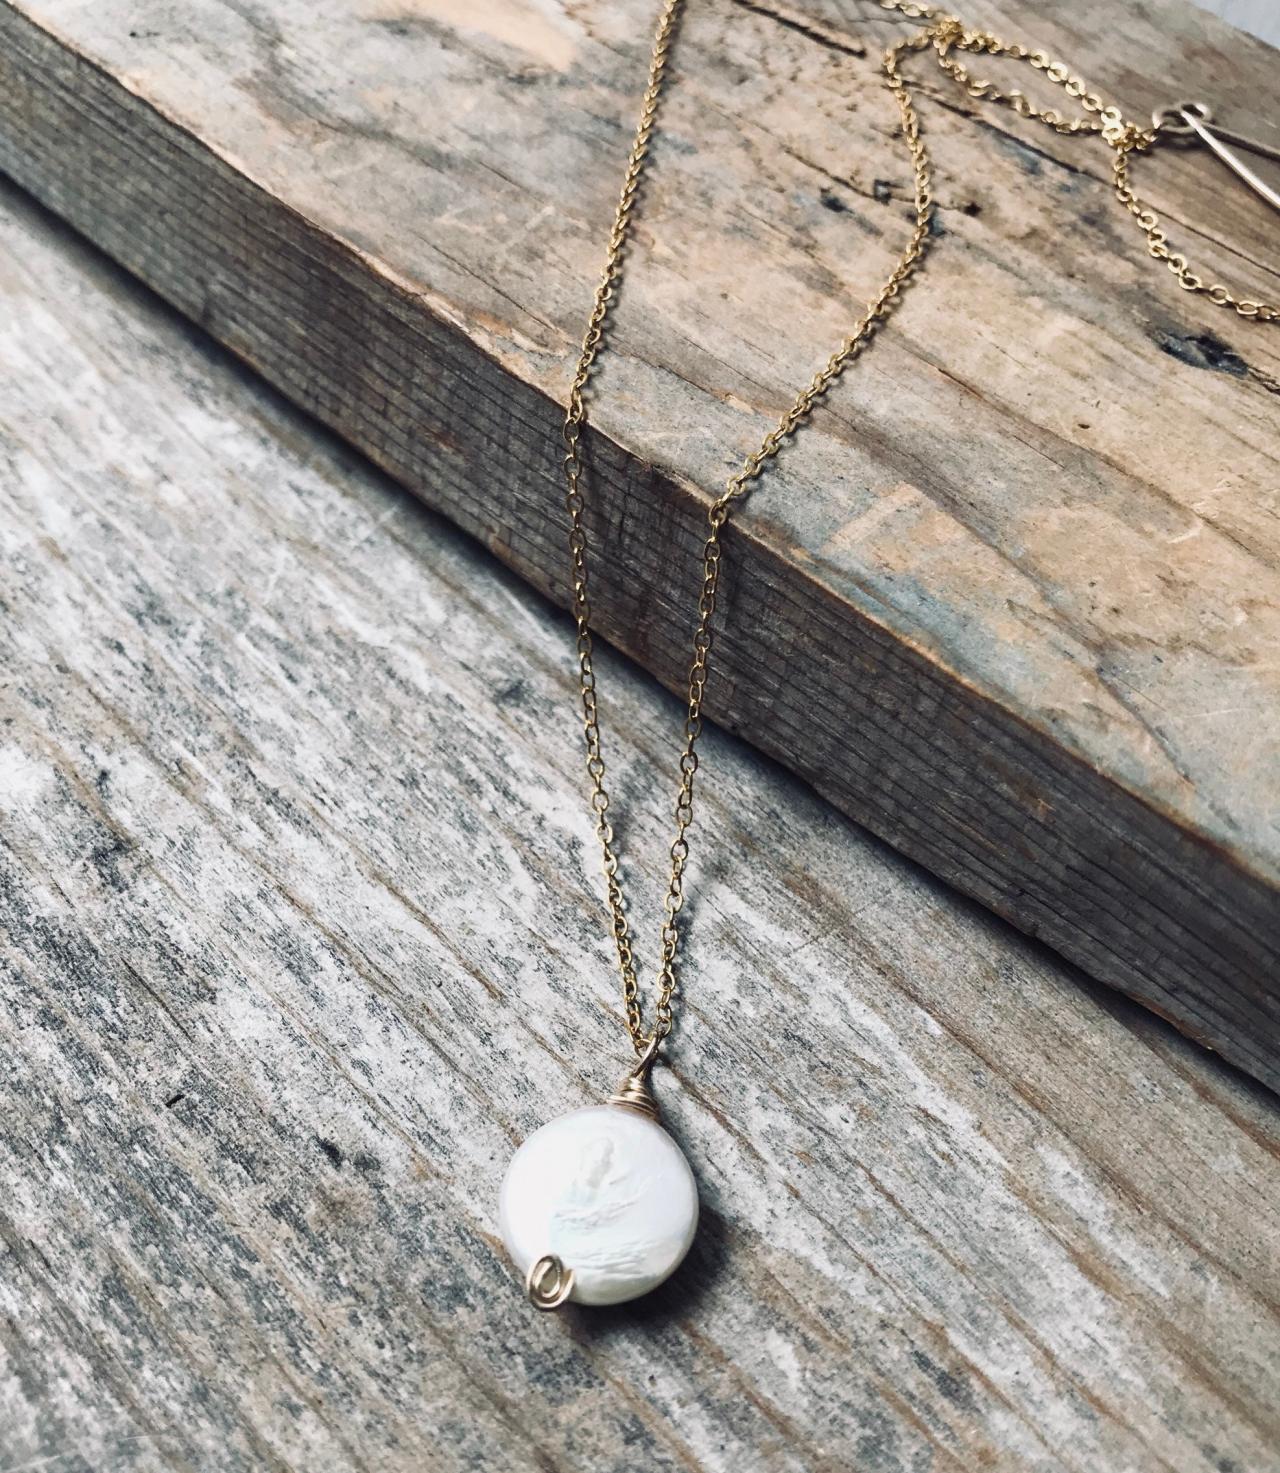 White Coin Pearl Necklace Gold Bridal Jewelry June Birthstone Pearl Jewelry Pendant Weddings.